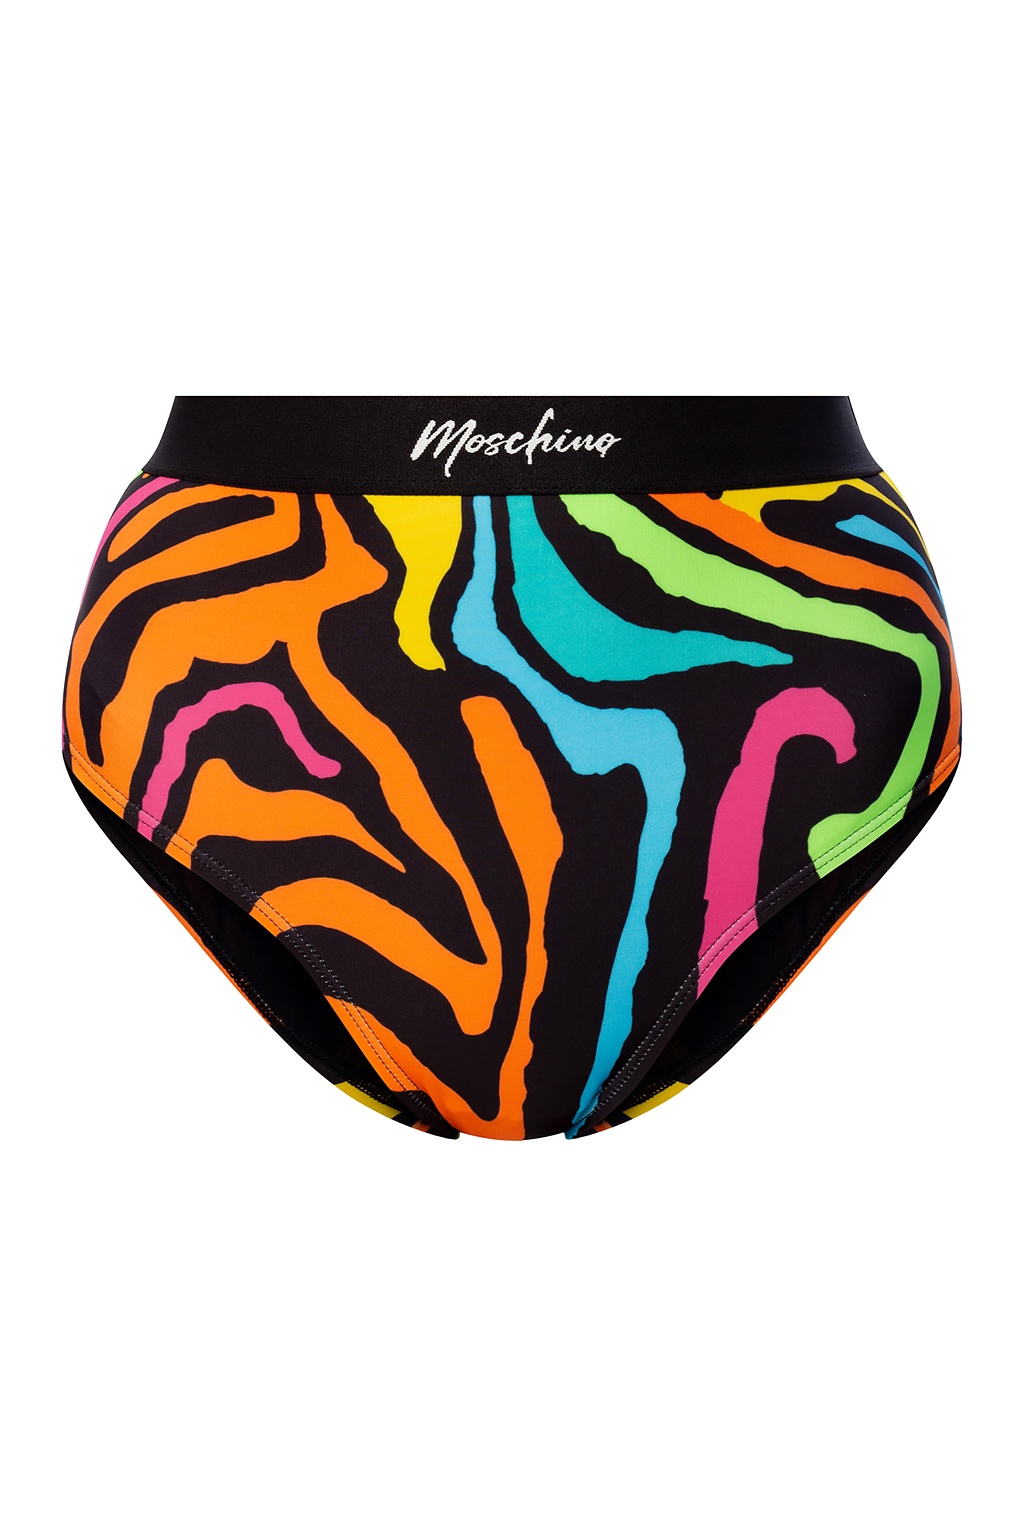 moschino bathing suit sale